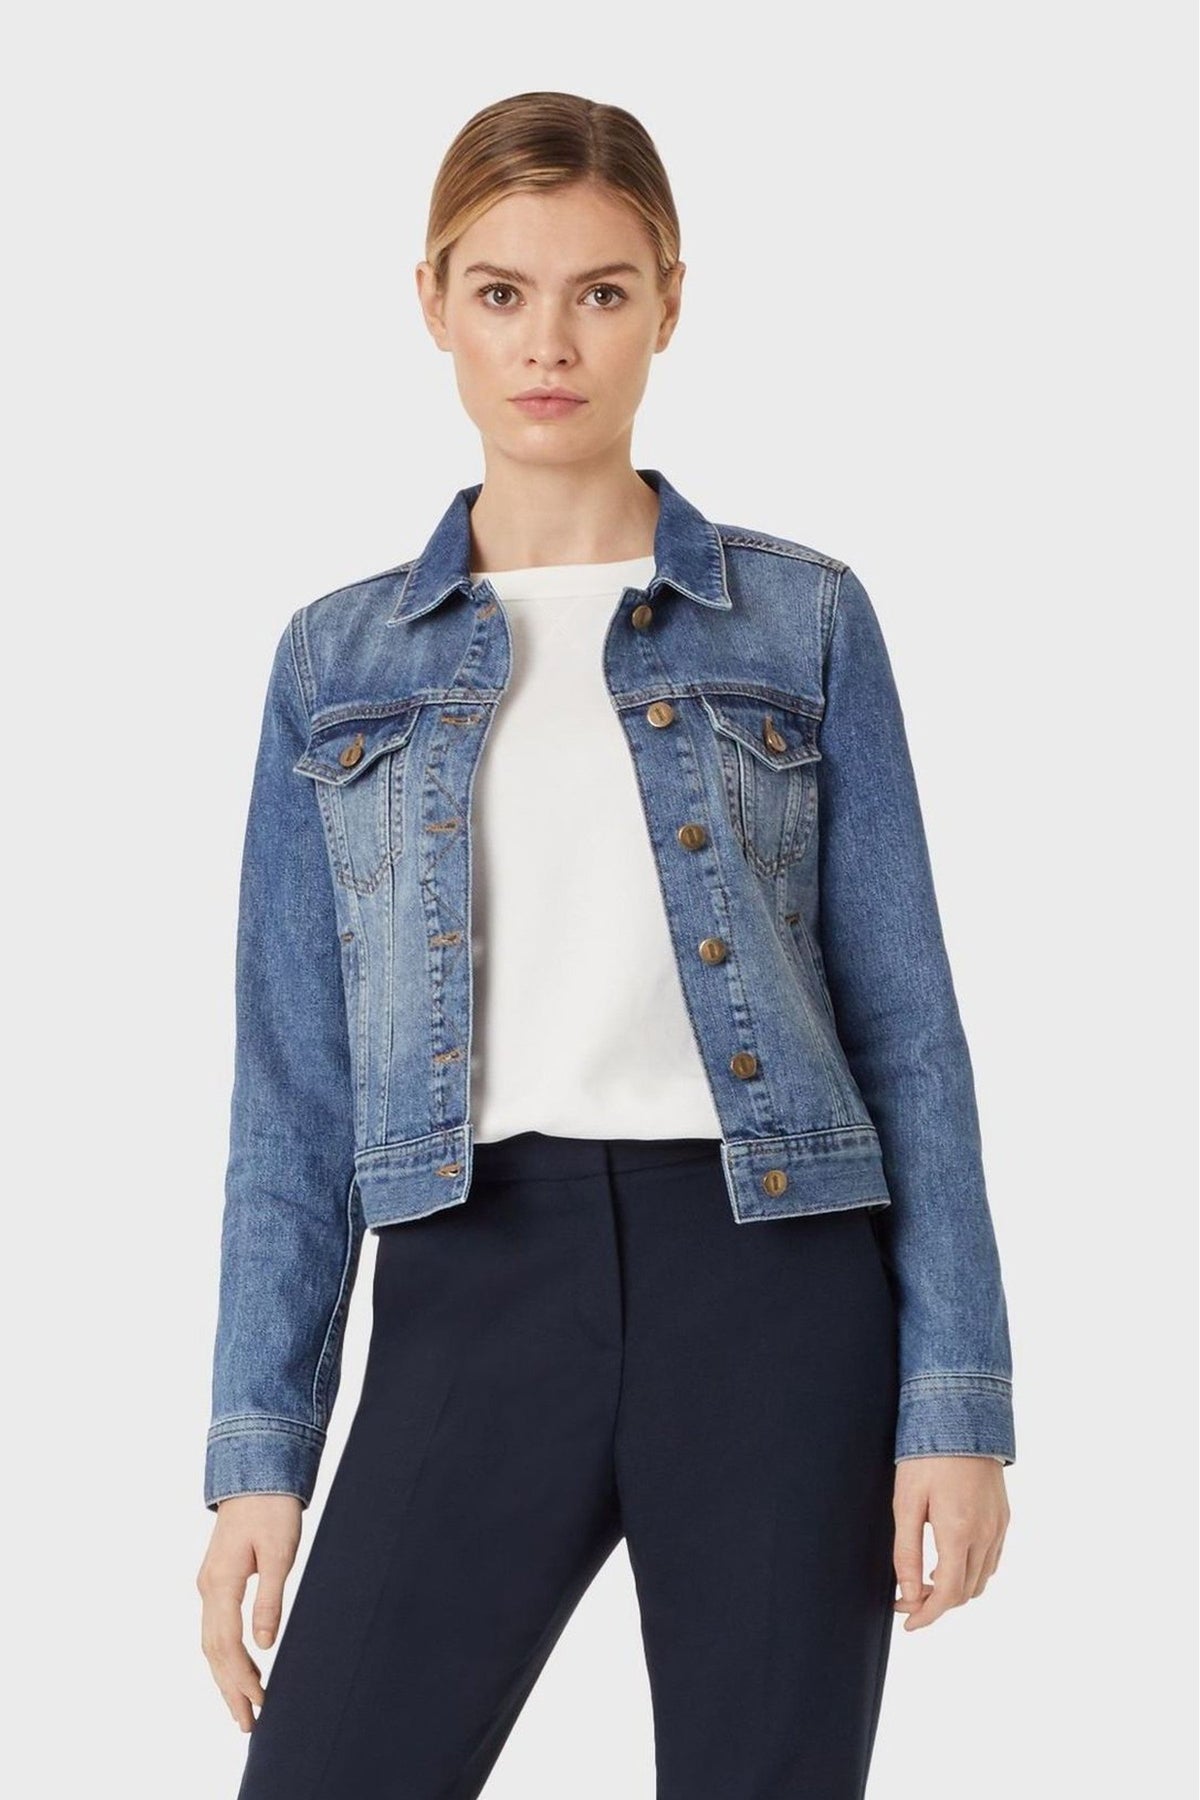 Hobbs Blue Mariam Jacket  - Front View - Available in Sizes S